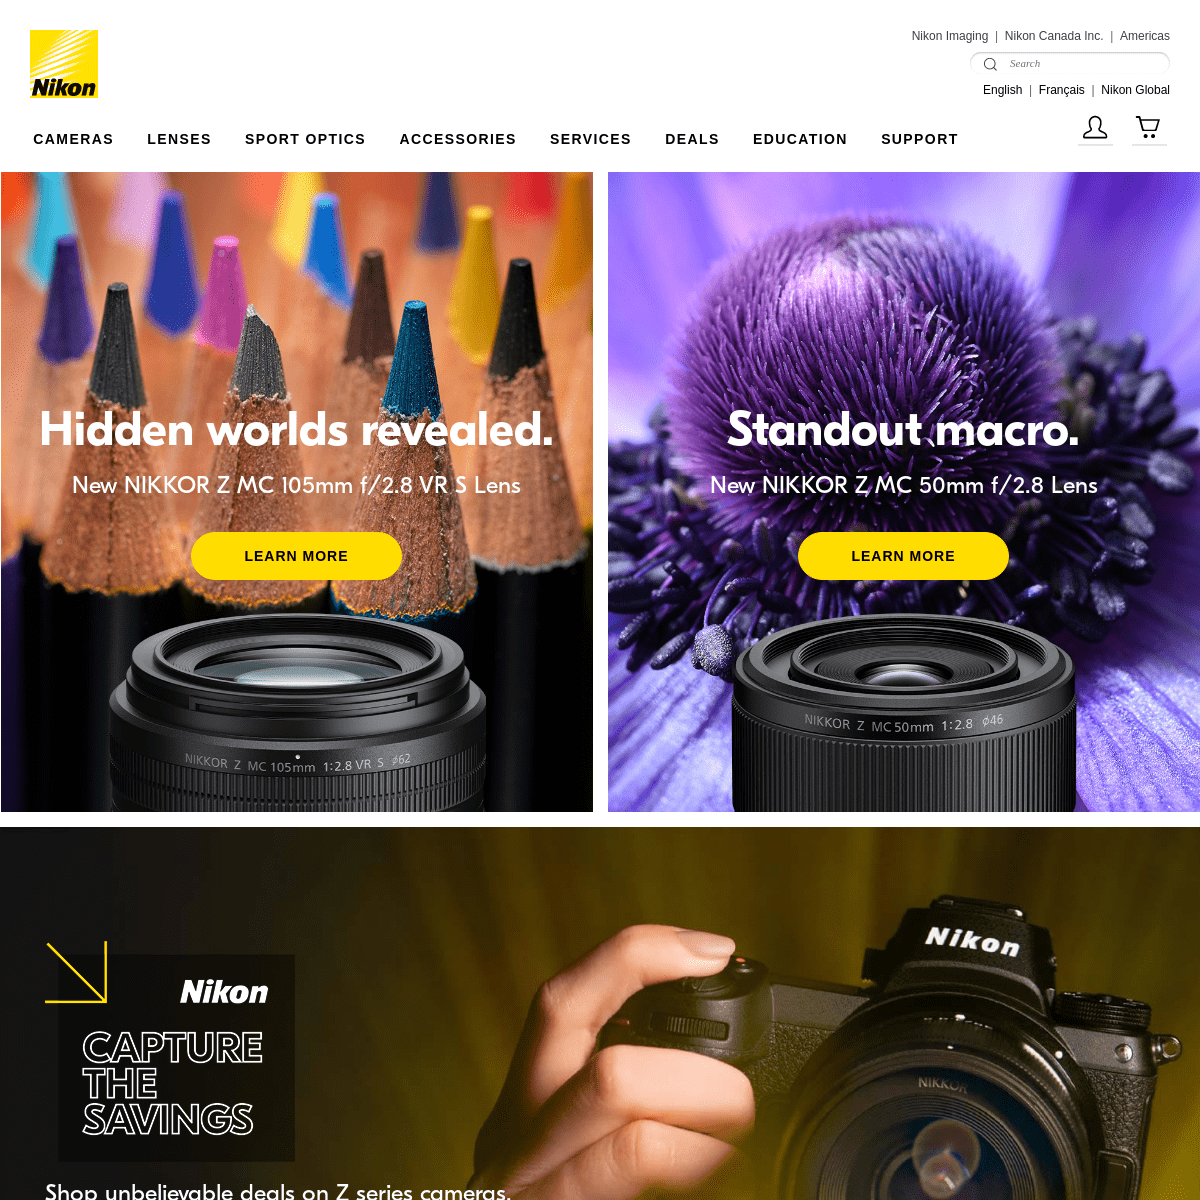 A complete backup of https://nikon.ca